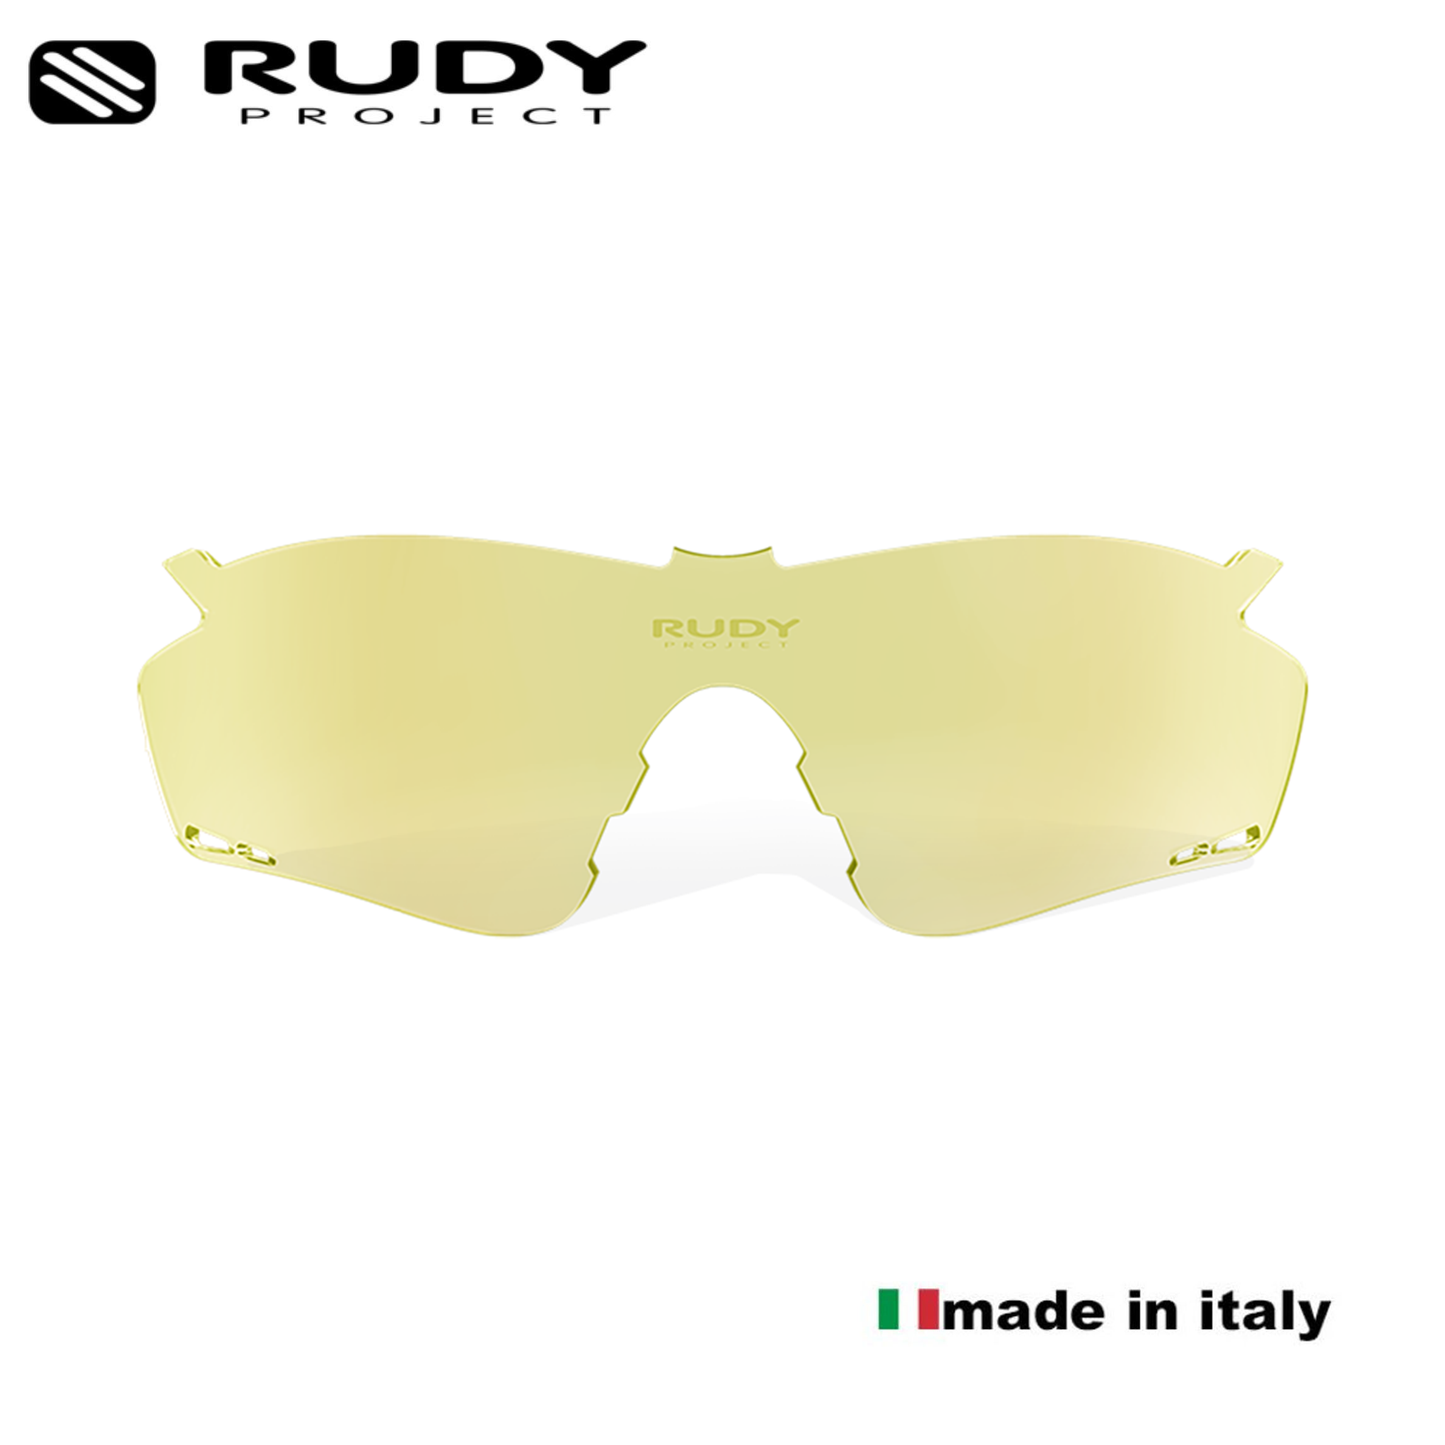 Rudy Project Tralyx Spare Lenses in Transparent Yellow